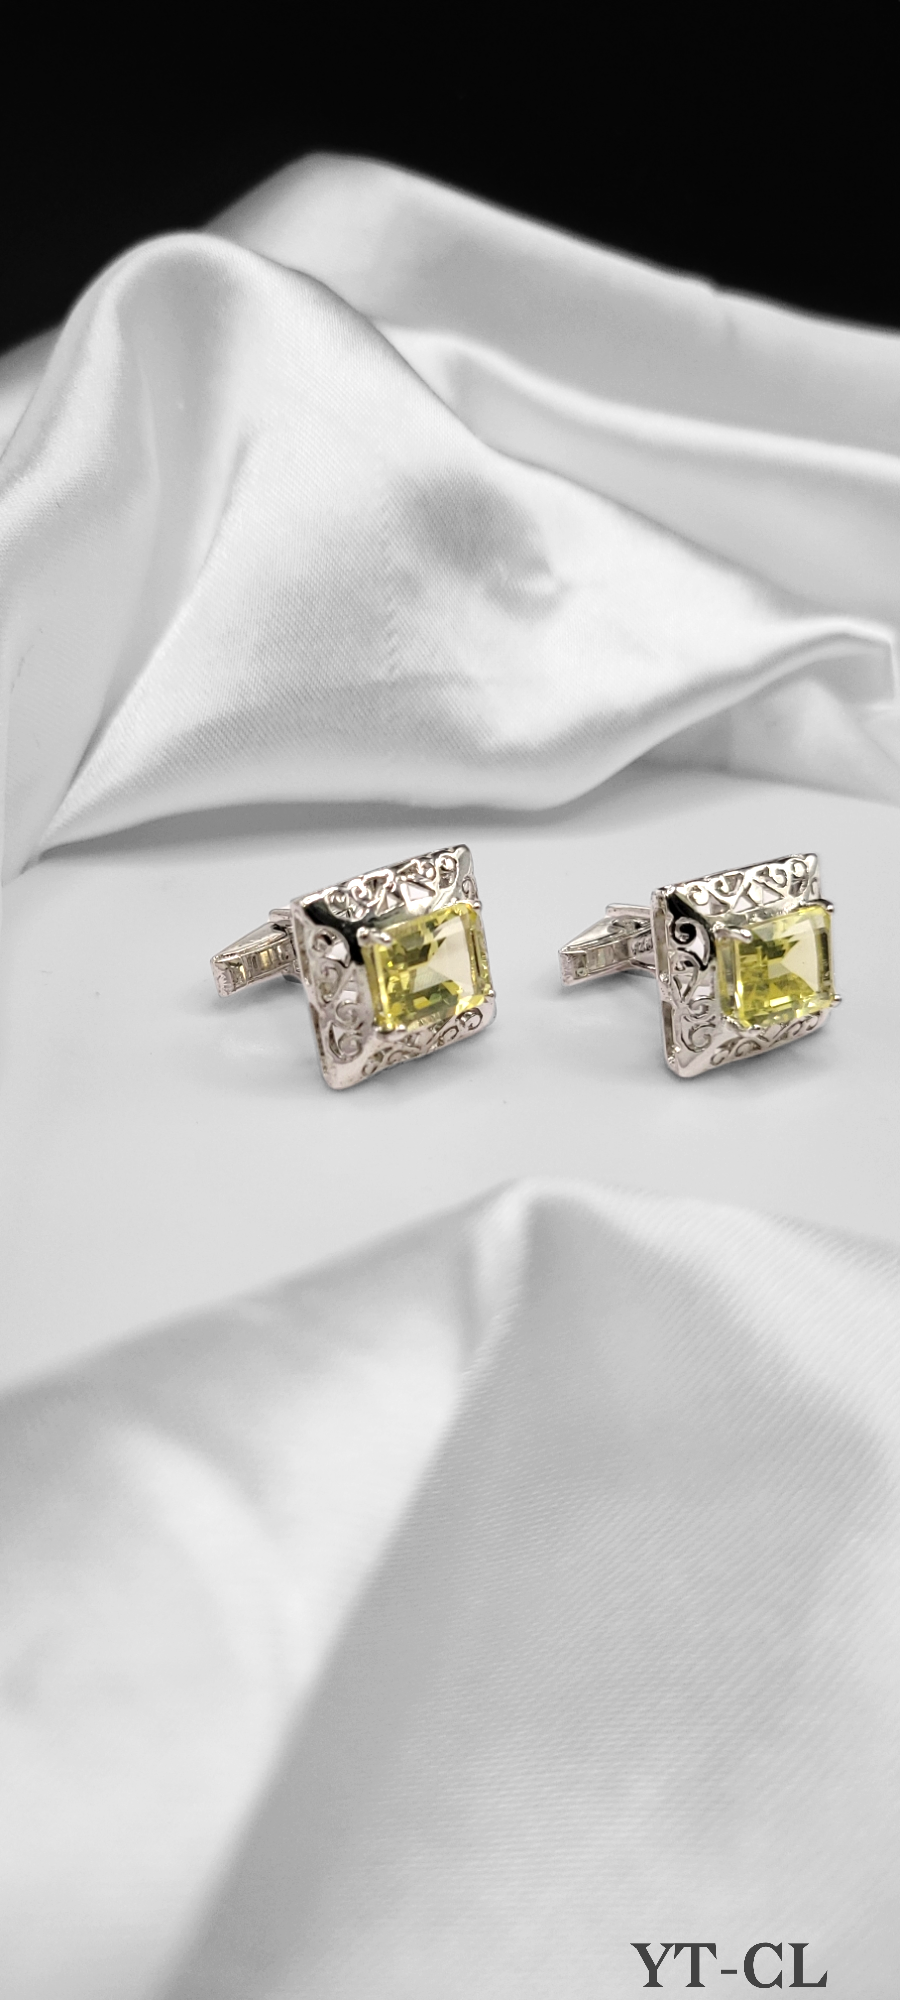 YELLOW TOPAZ CUFF LINKS ON STERLING SILVER WITH INTRICATE BORDER DESIGN. ONE OF A KIND. BEST KNOWN TO BRING ABUNDANCE AND PROSPERITY TO ITS WEAR.